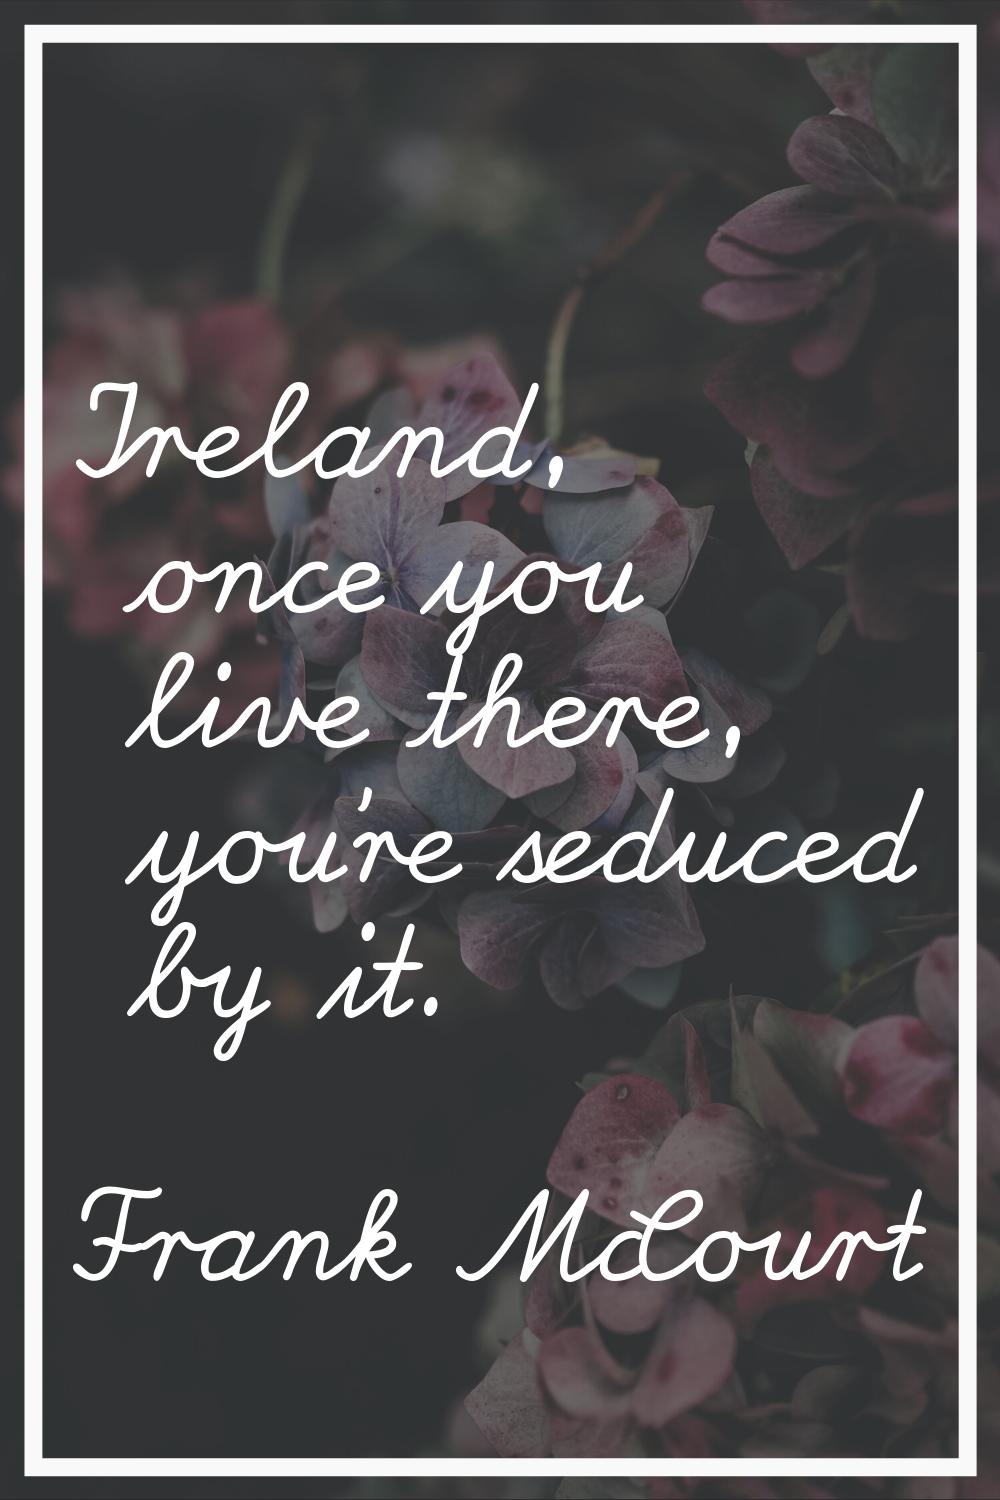 Ireland, once you live there, you're seduced by it.